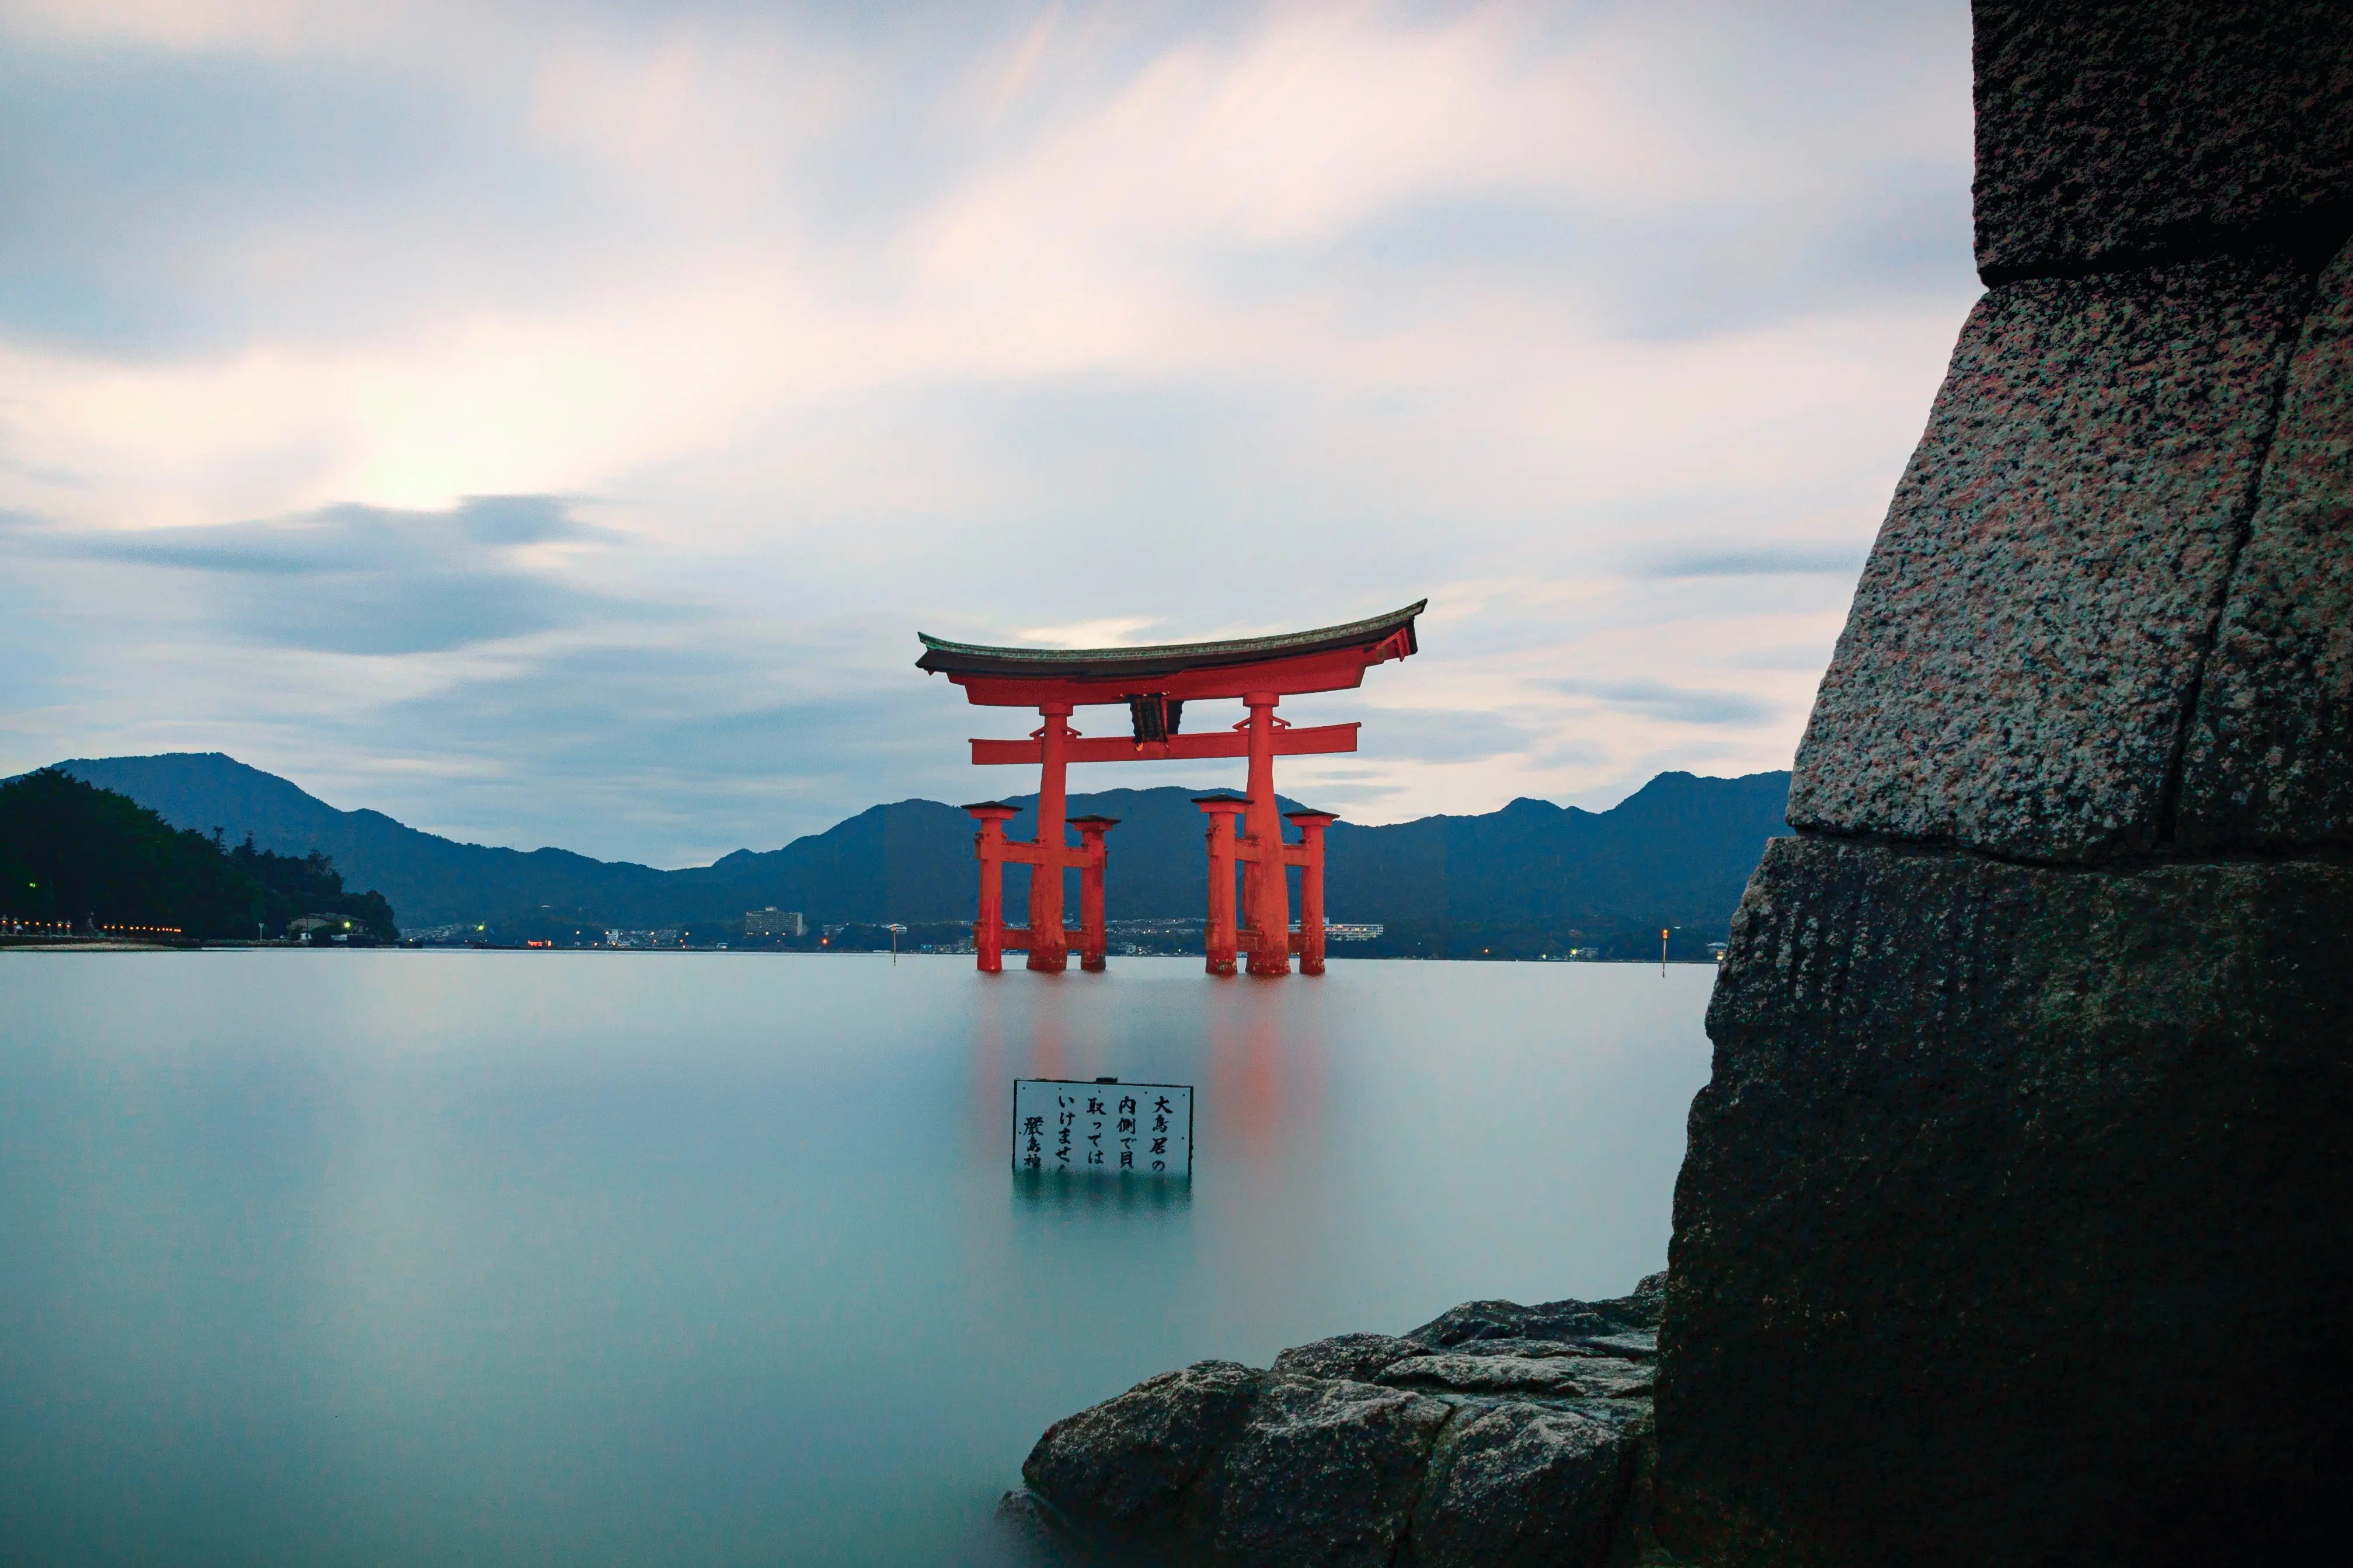 Photo of red Japanese torii gate sticking out of water infront of mountains at dusk